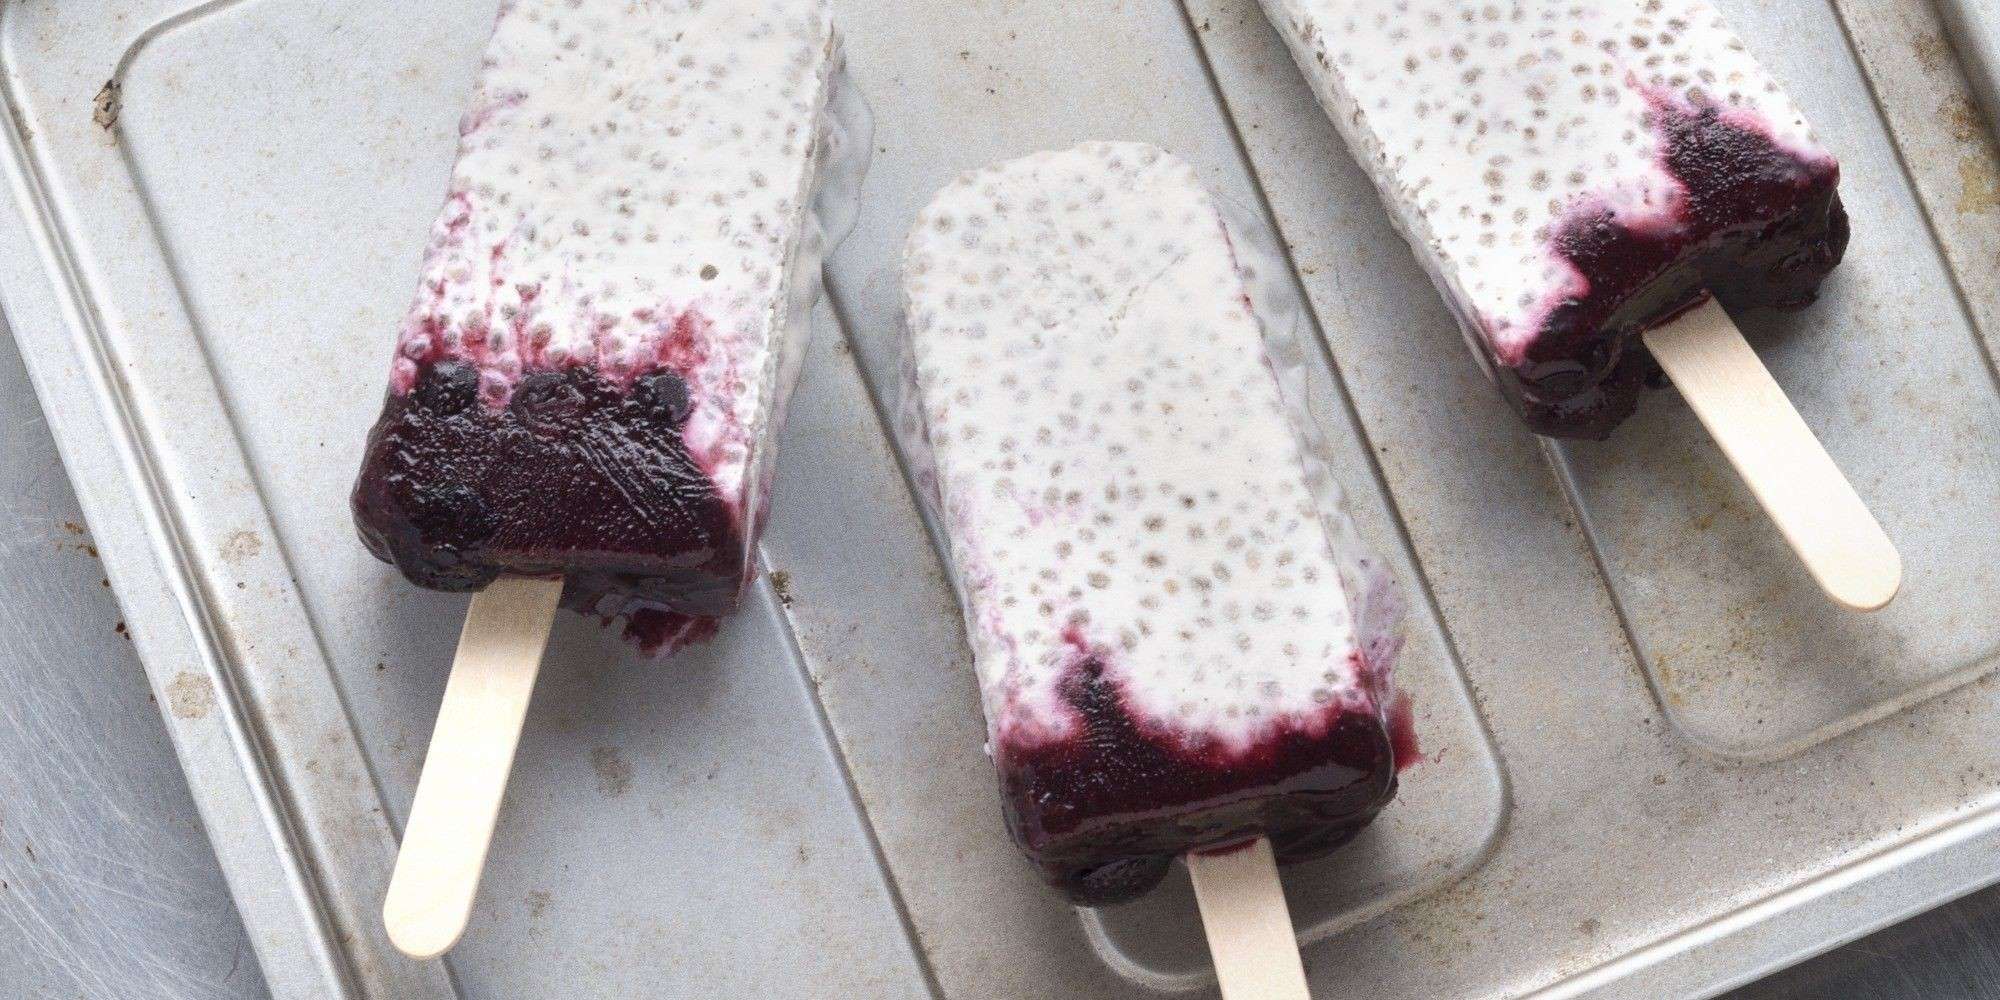 Balsamic-Roasted Blueberry Chia Popsicles